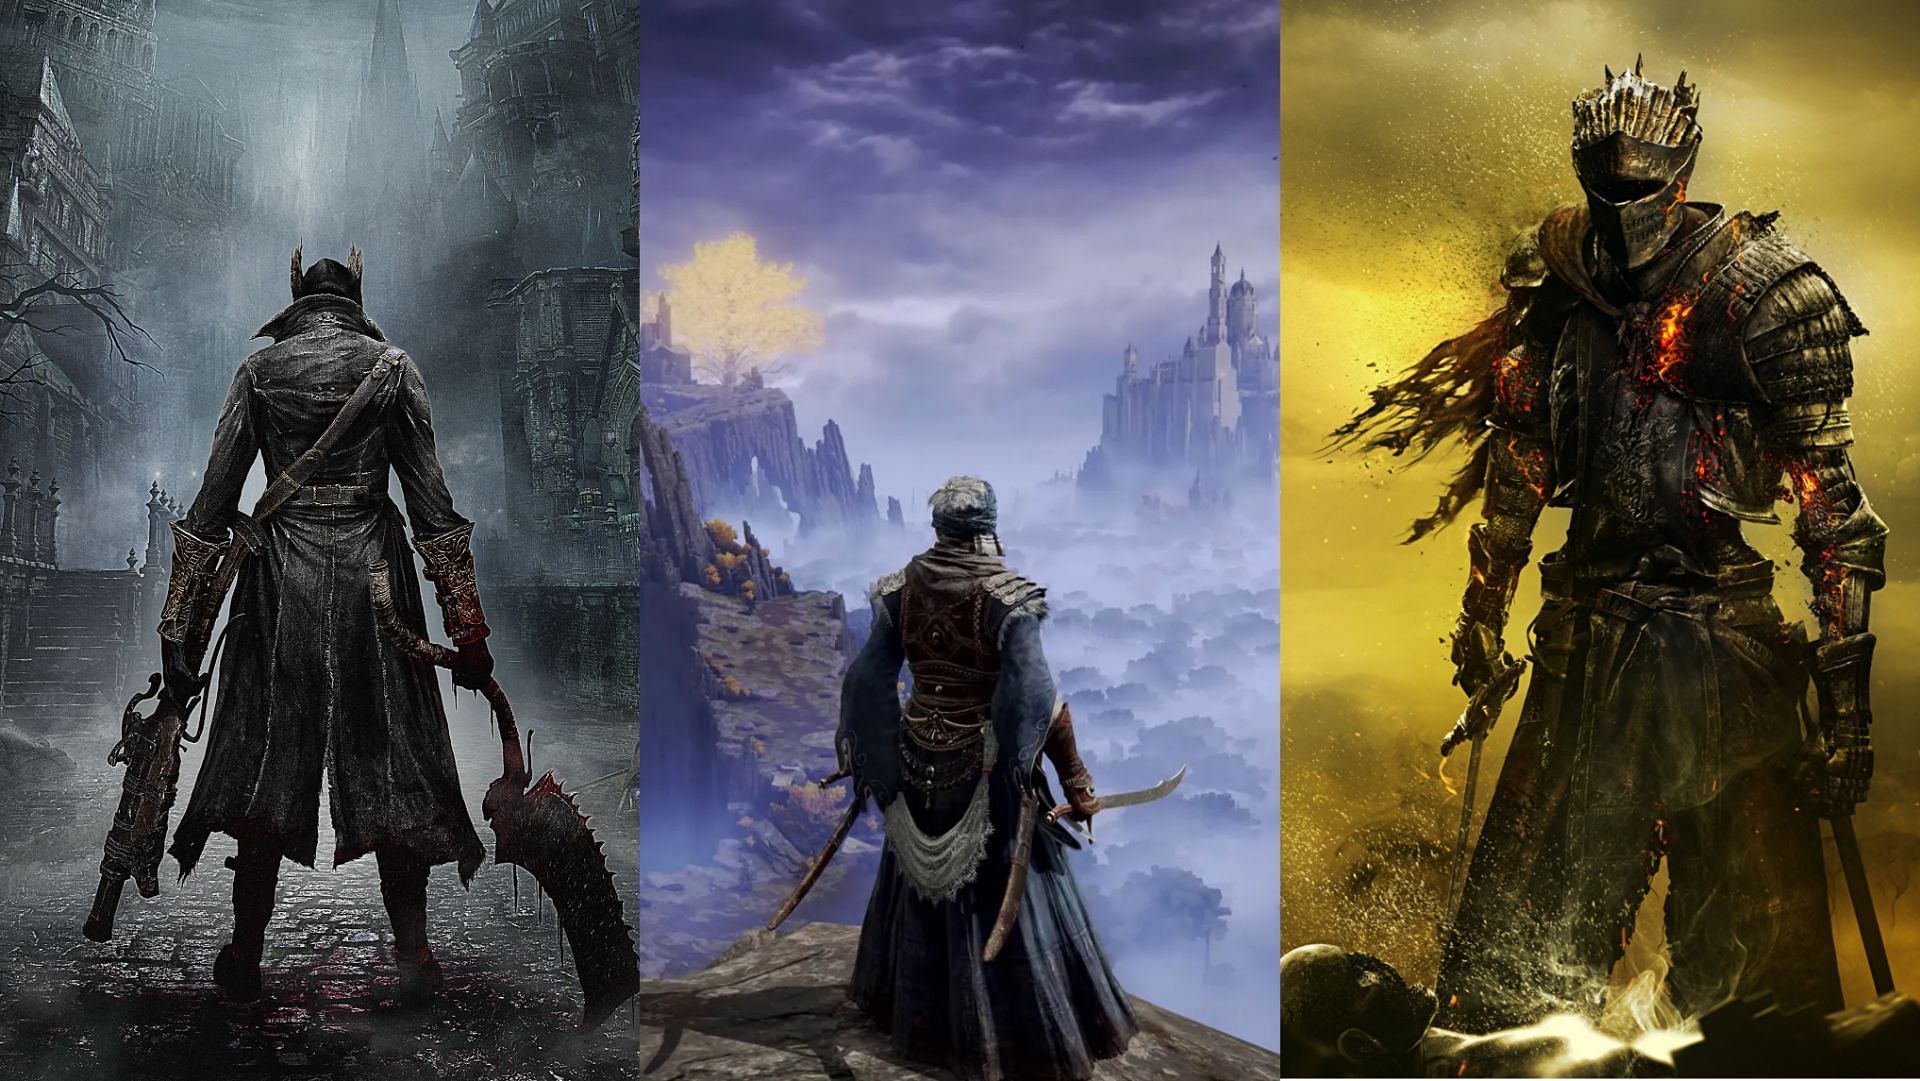 FromSoftware has delivered some amazing successes with Elden Ring being the most recent one (Images via FromSoftware)